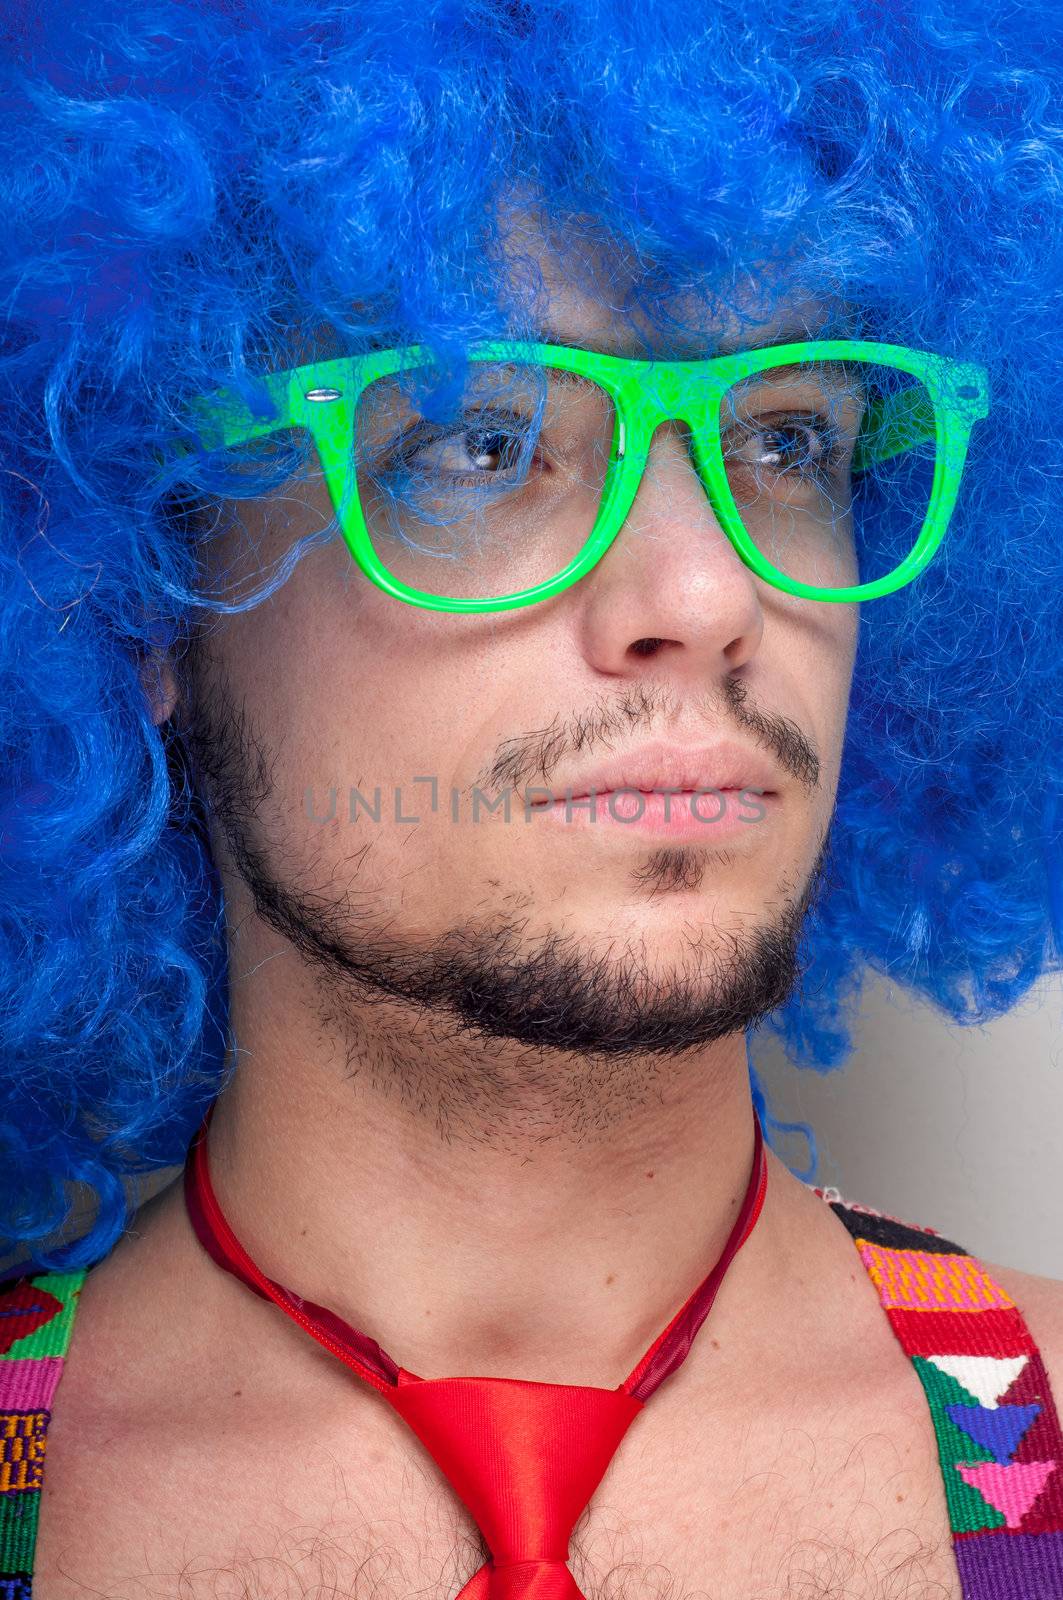 Funny guy naked with blue wig and red tie on green backgrund